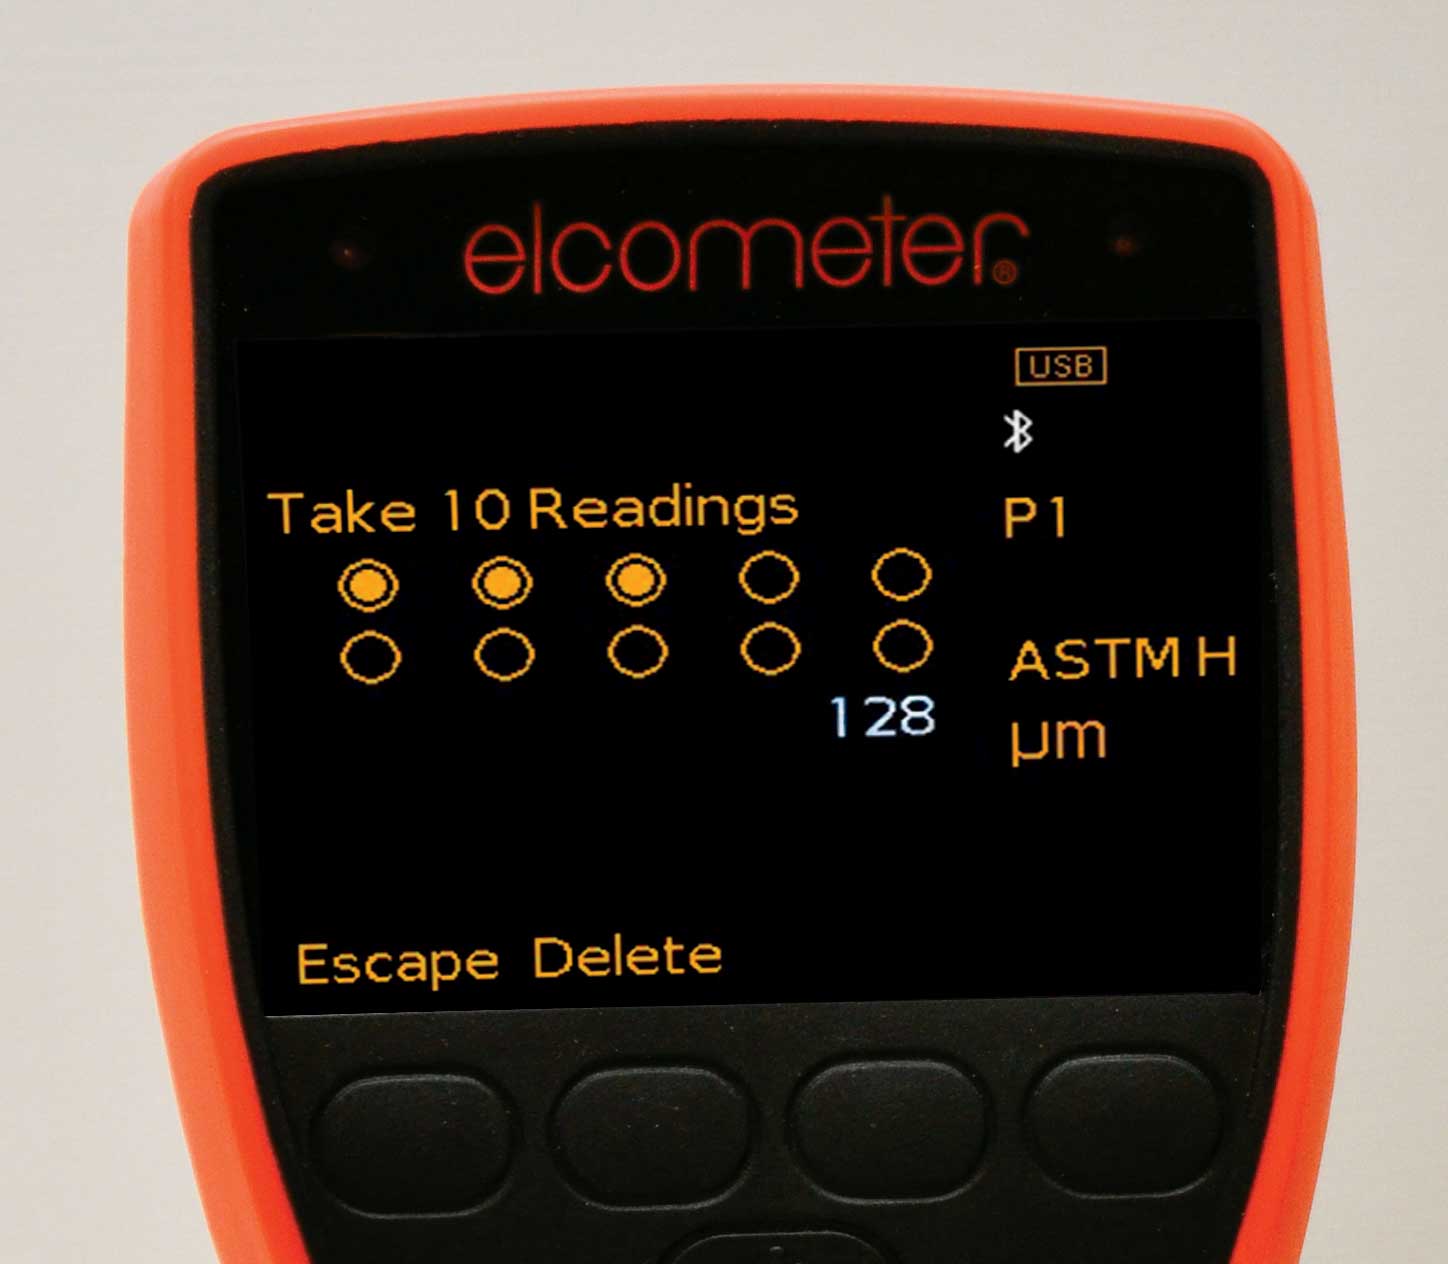 The face of an elcometer coating inspection LED screen. On the screen, there is the copy 'Take 10 Readings' and 10 circles underneath. In the bottom left corner, there are the options to 'Escape' and 'Delete.' Under the LED screen are four buttons.